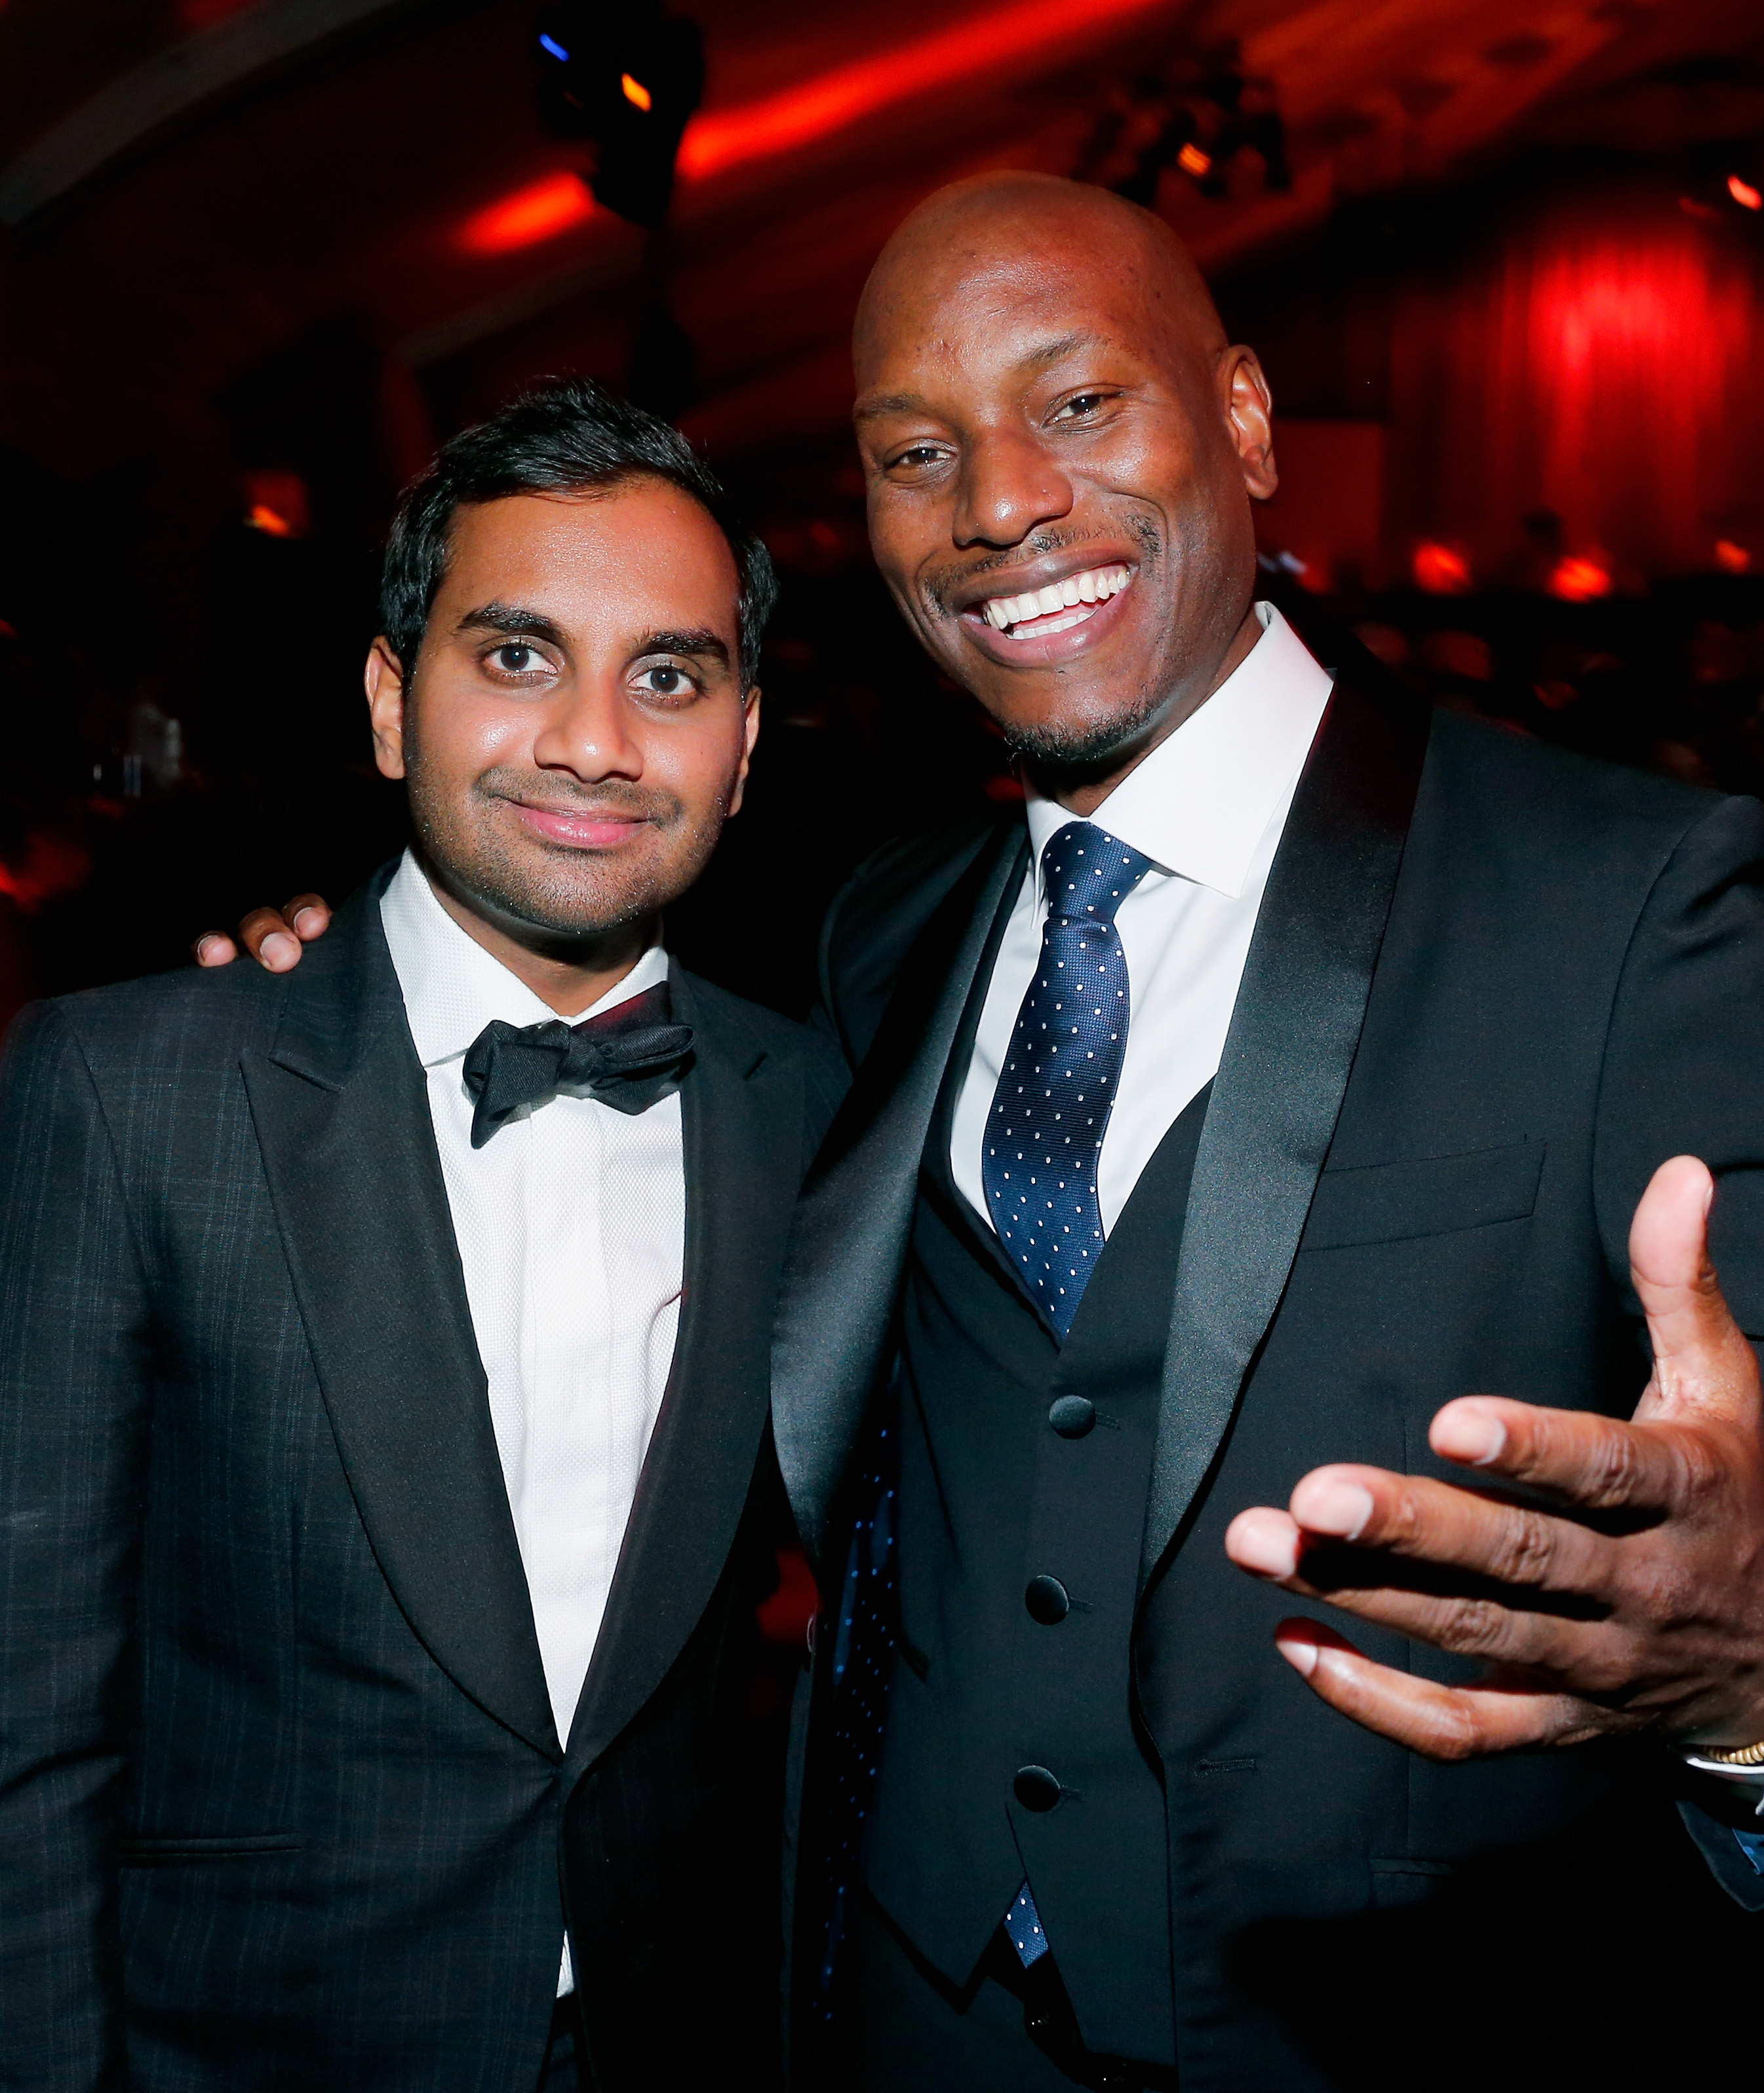 Comedian Aziz Ansari and actor Tyrese Gibson attend The Weinstein Company and Netflix Golden Globe Party on January 10, 2016 in Beverly Hills, California. (Rich Polk—Getty Images)